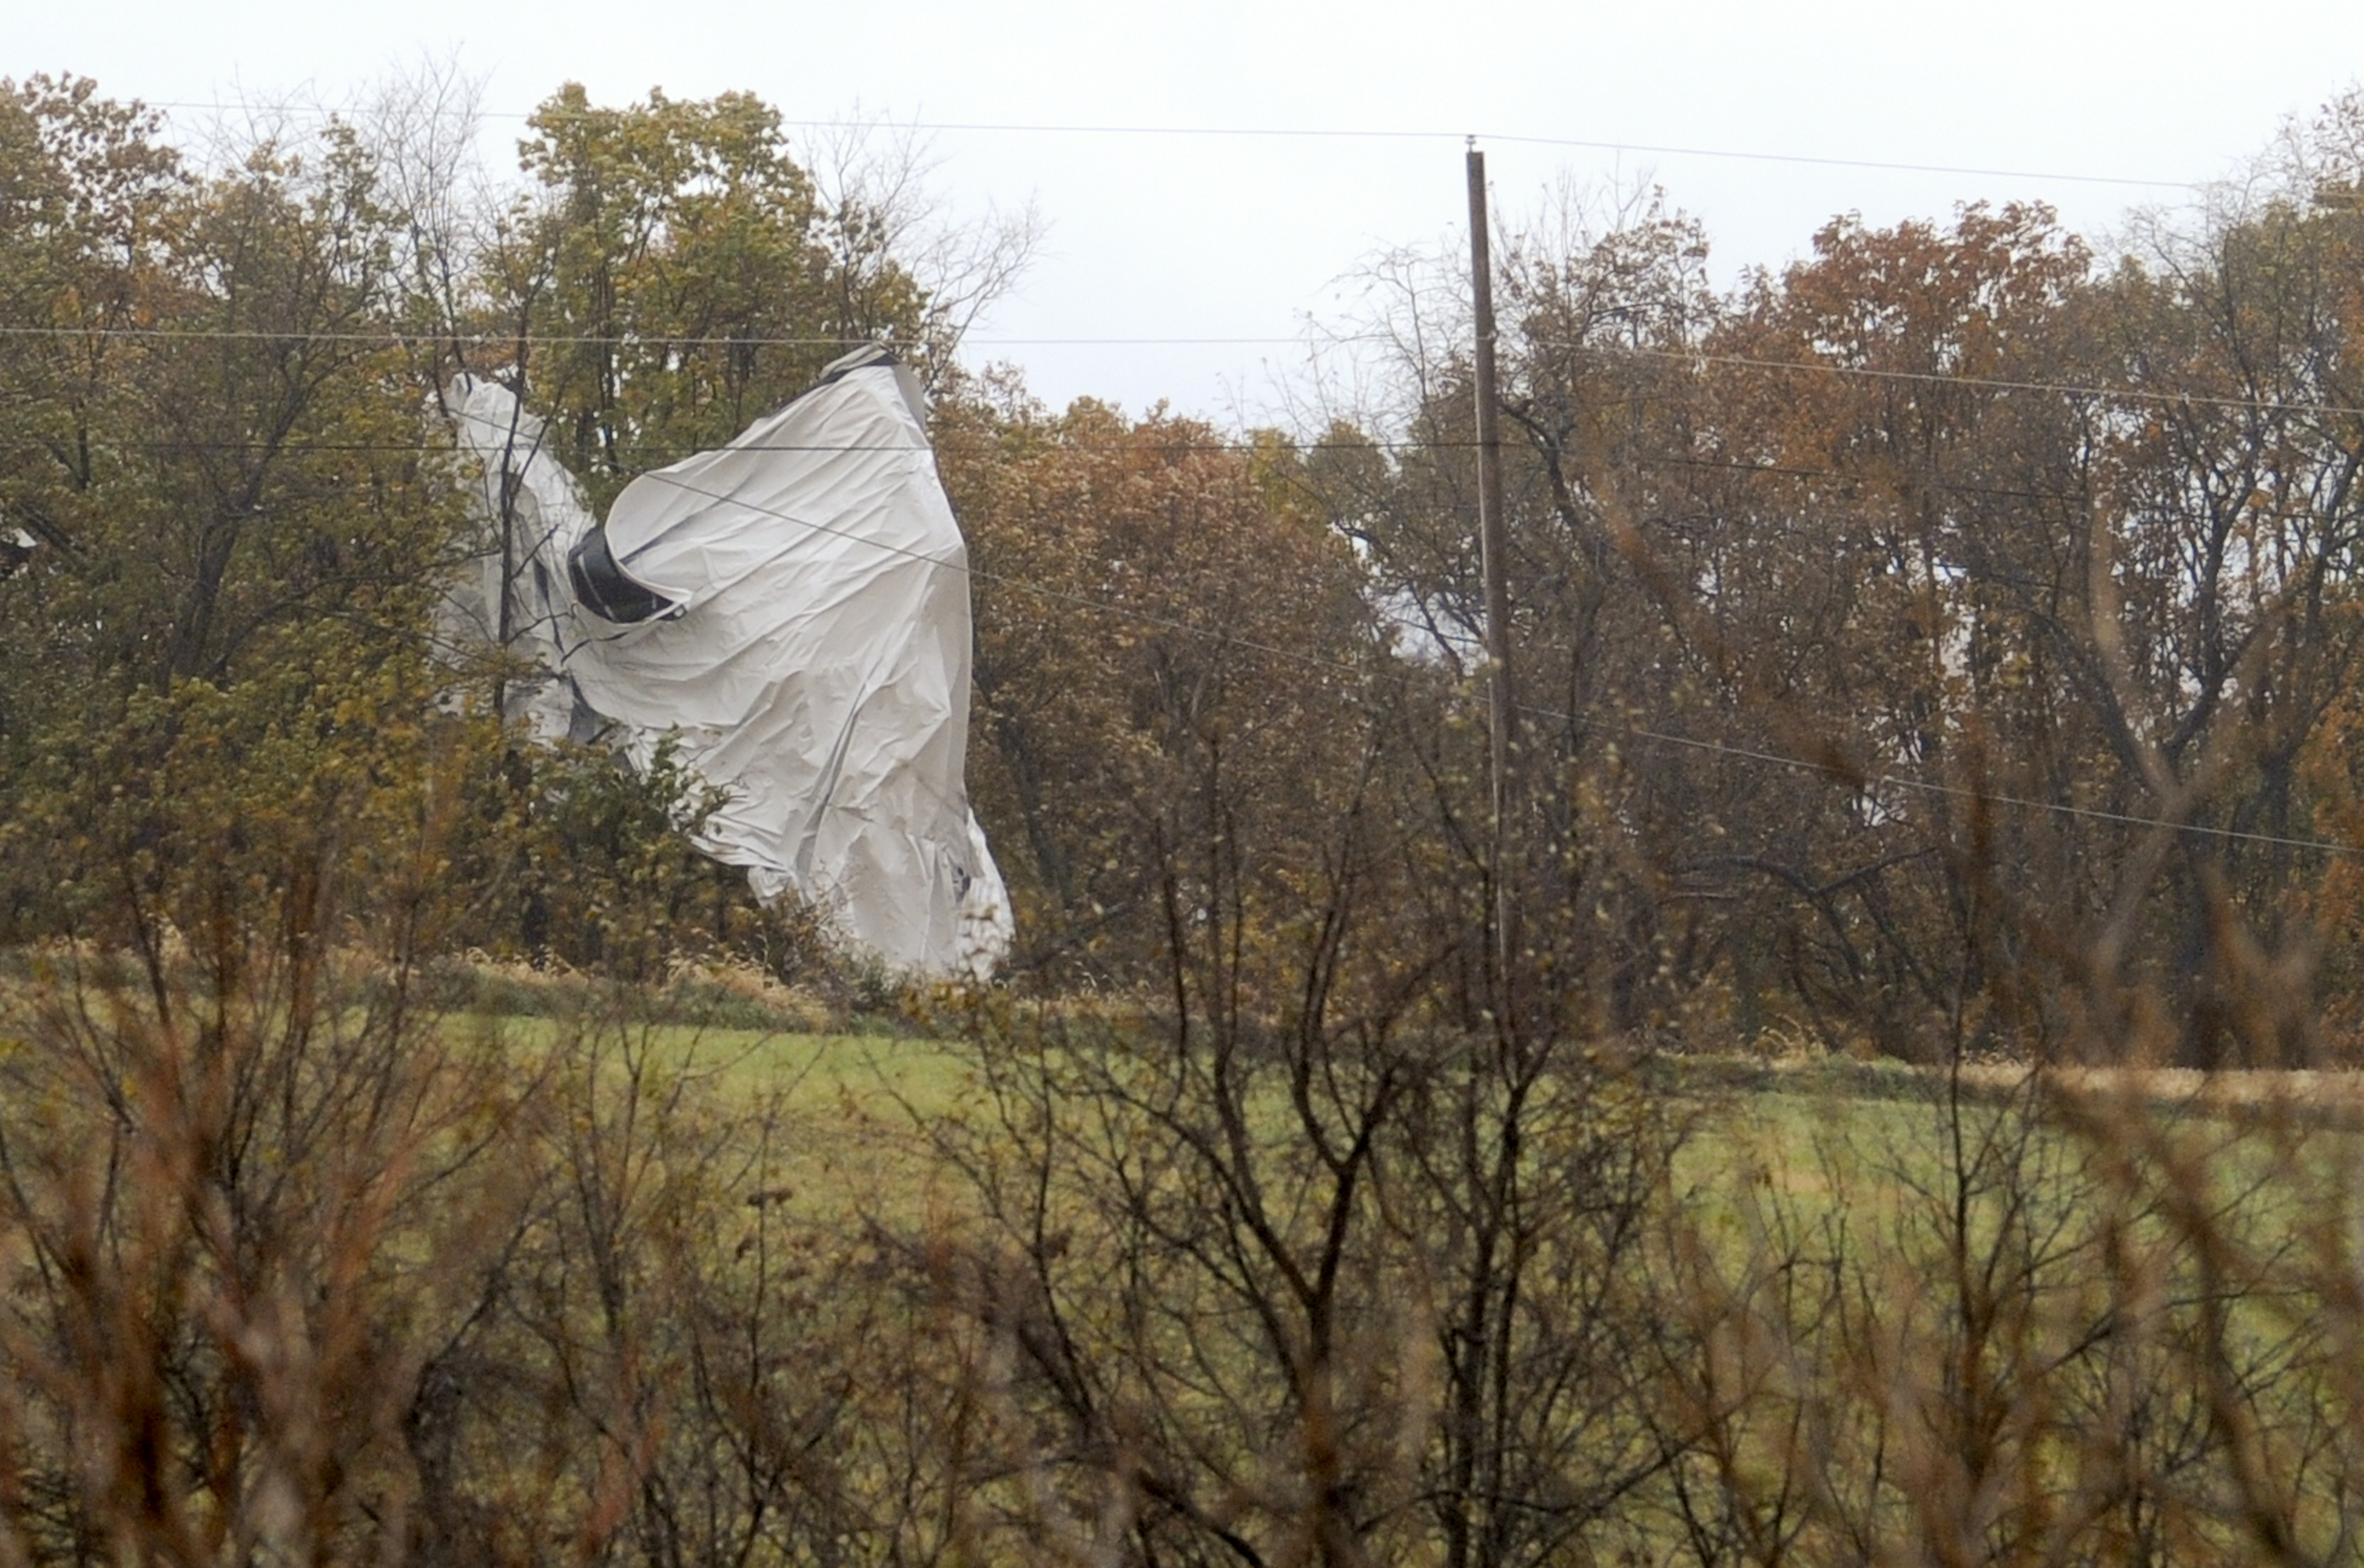 Part of an unmanned Army surveillance blimp hangs off a group of trees after crash landing near Muncy, Pa. on Oct. 28, 2015. (Jimmy May—AP)